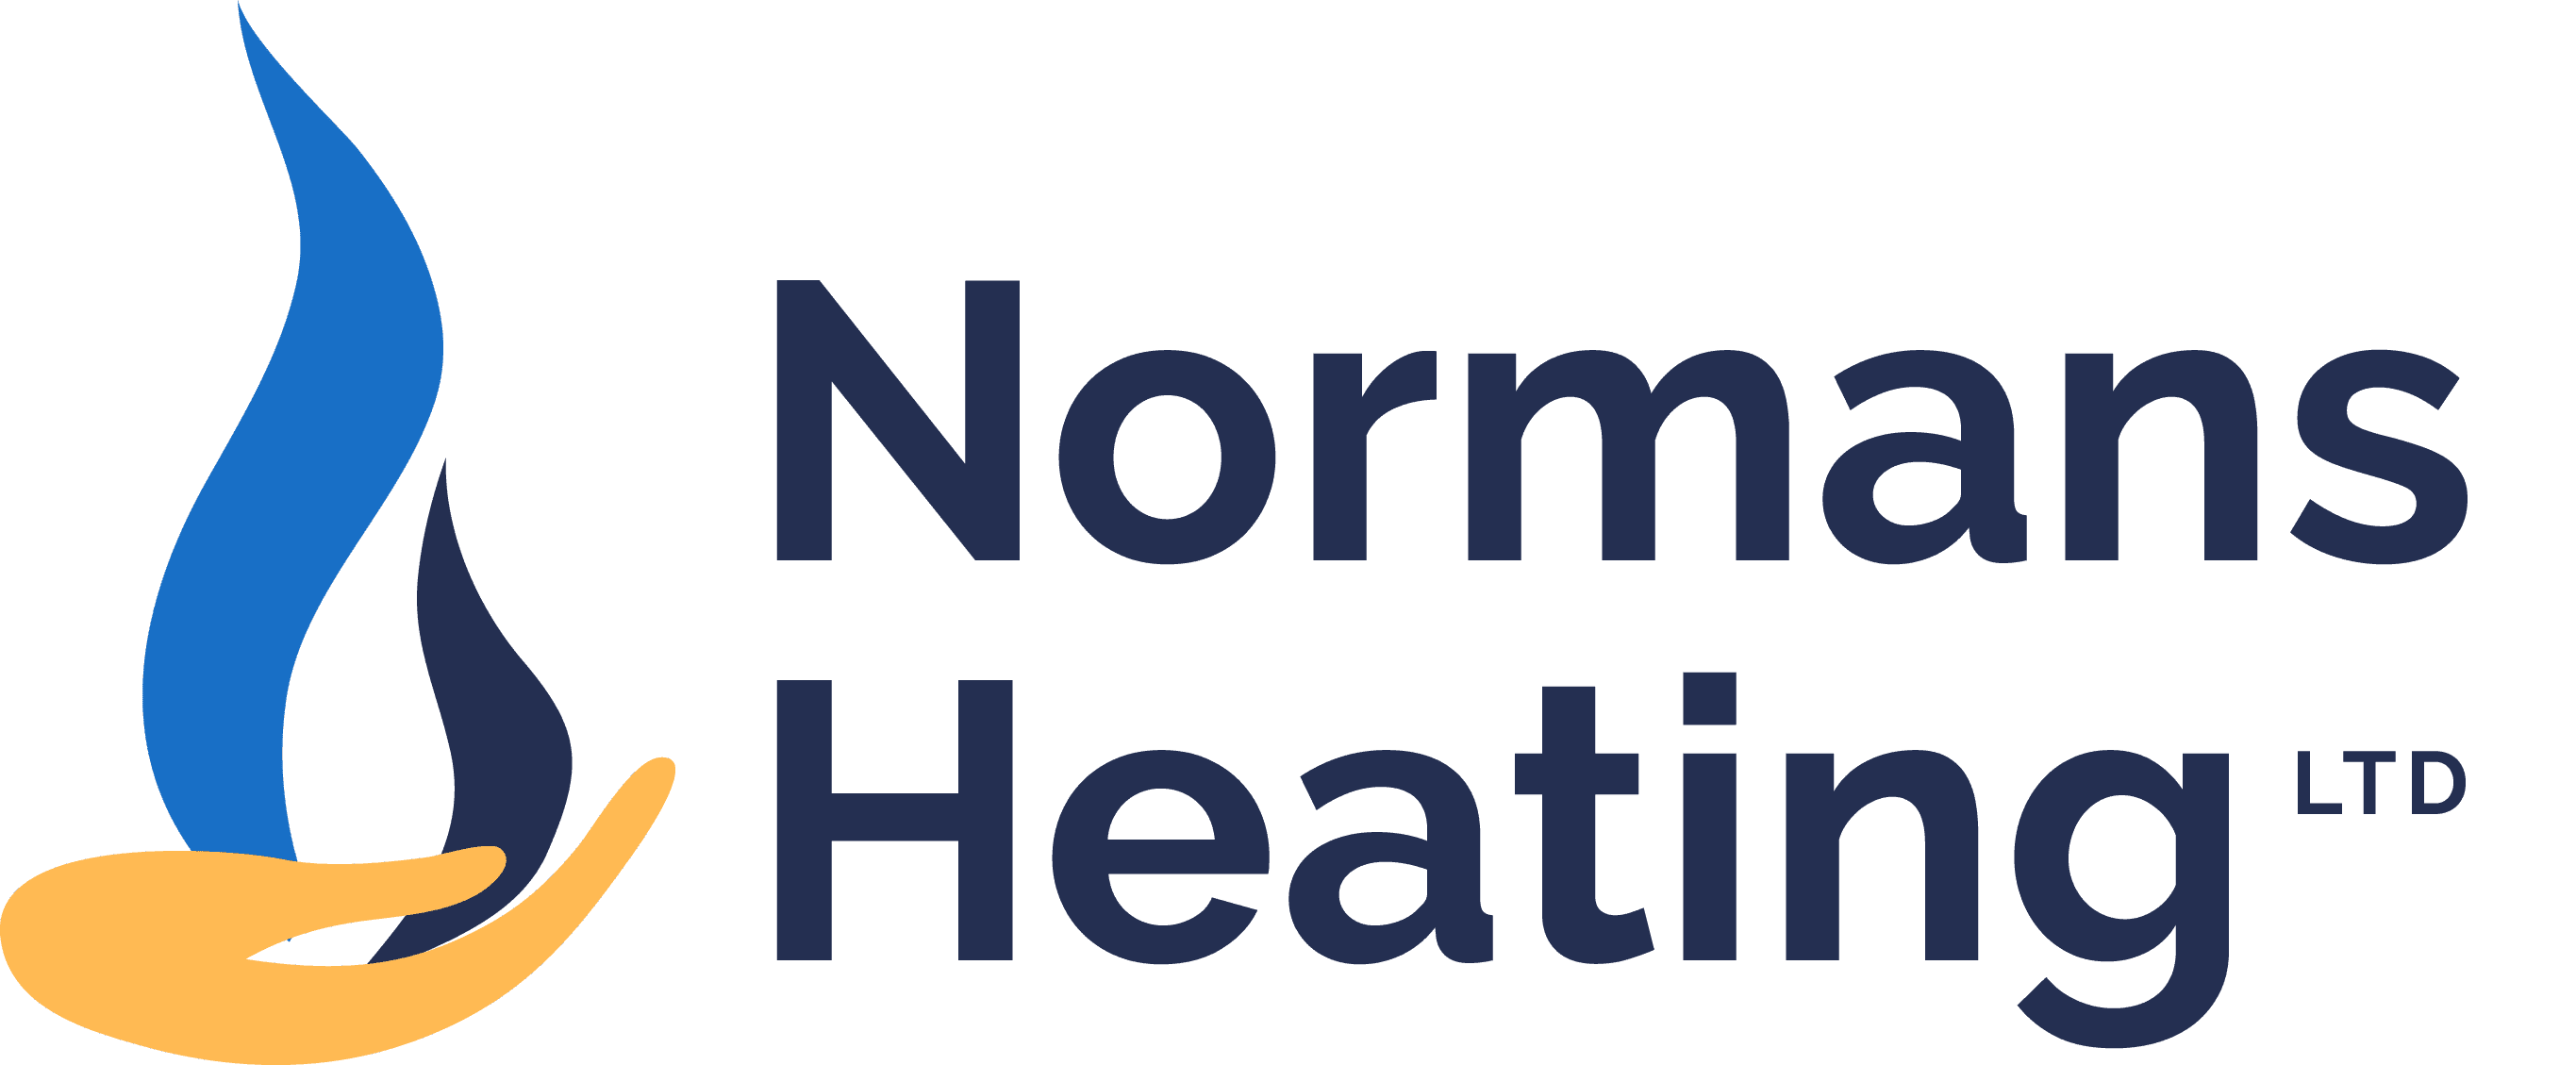 Normans Heating